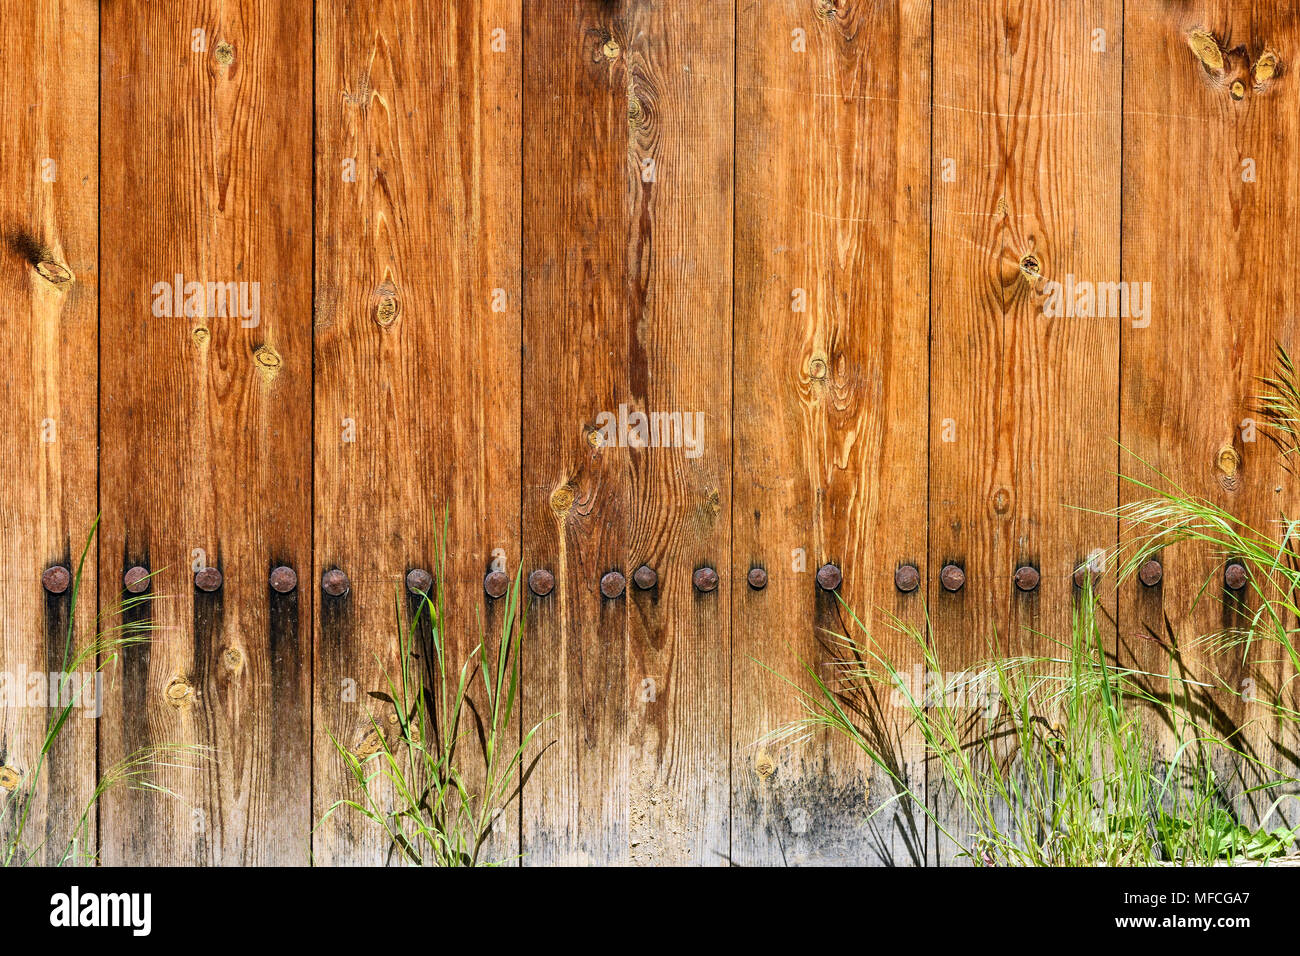 Background of light wooden planks with nubs and heads of rusty bolts, grass stems on bottom Stock Photo